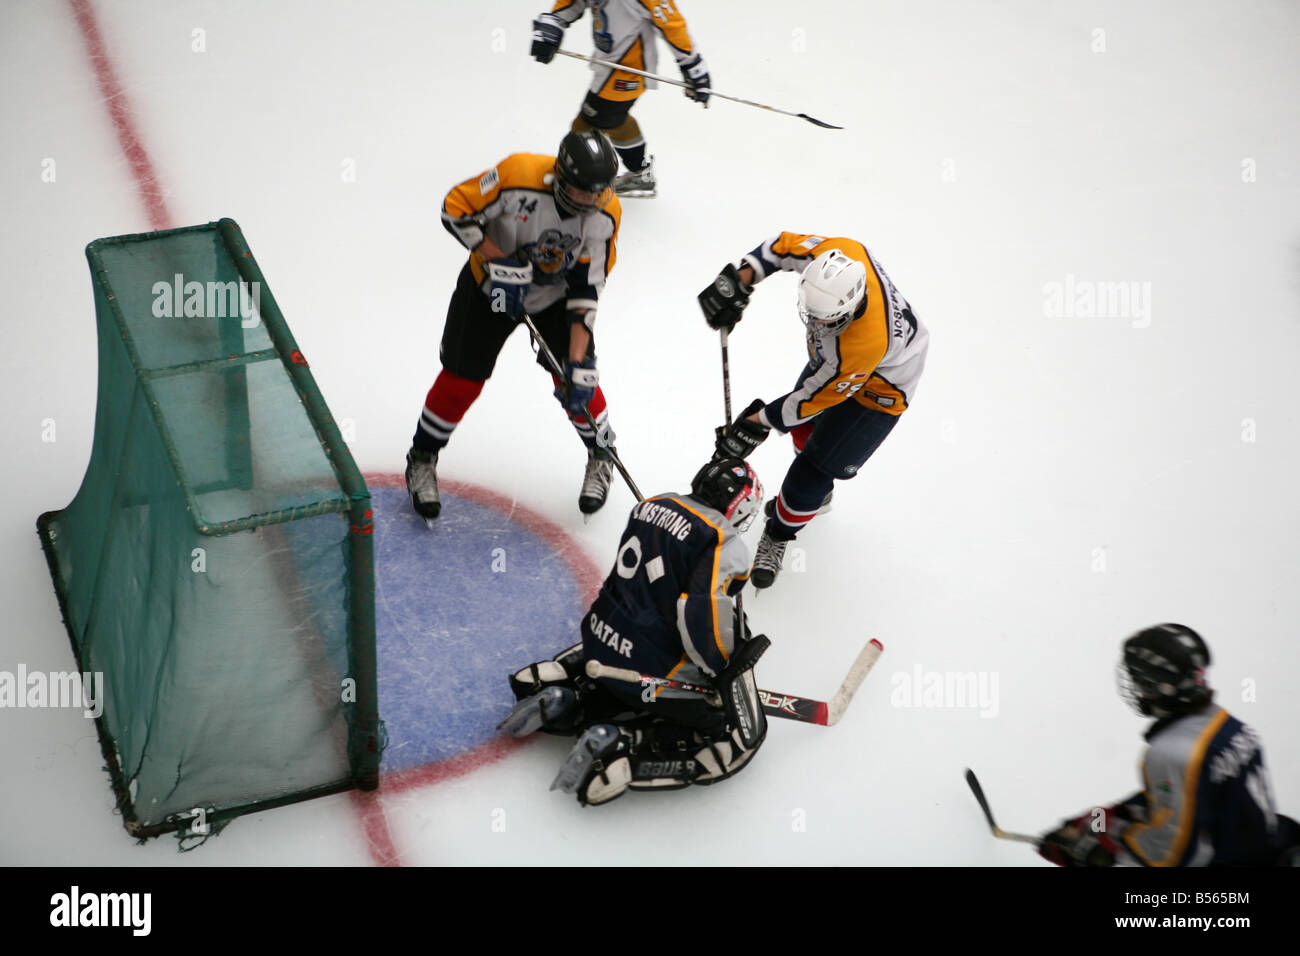 An ice hockey game in action at the City Center shopping mall in Doha Qatar Arabia Stock Photo